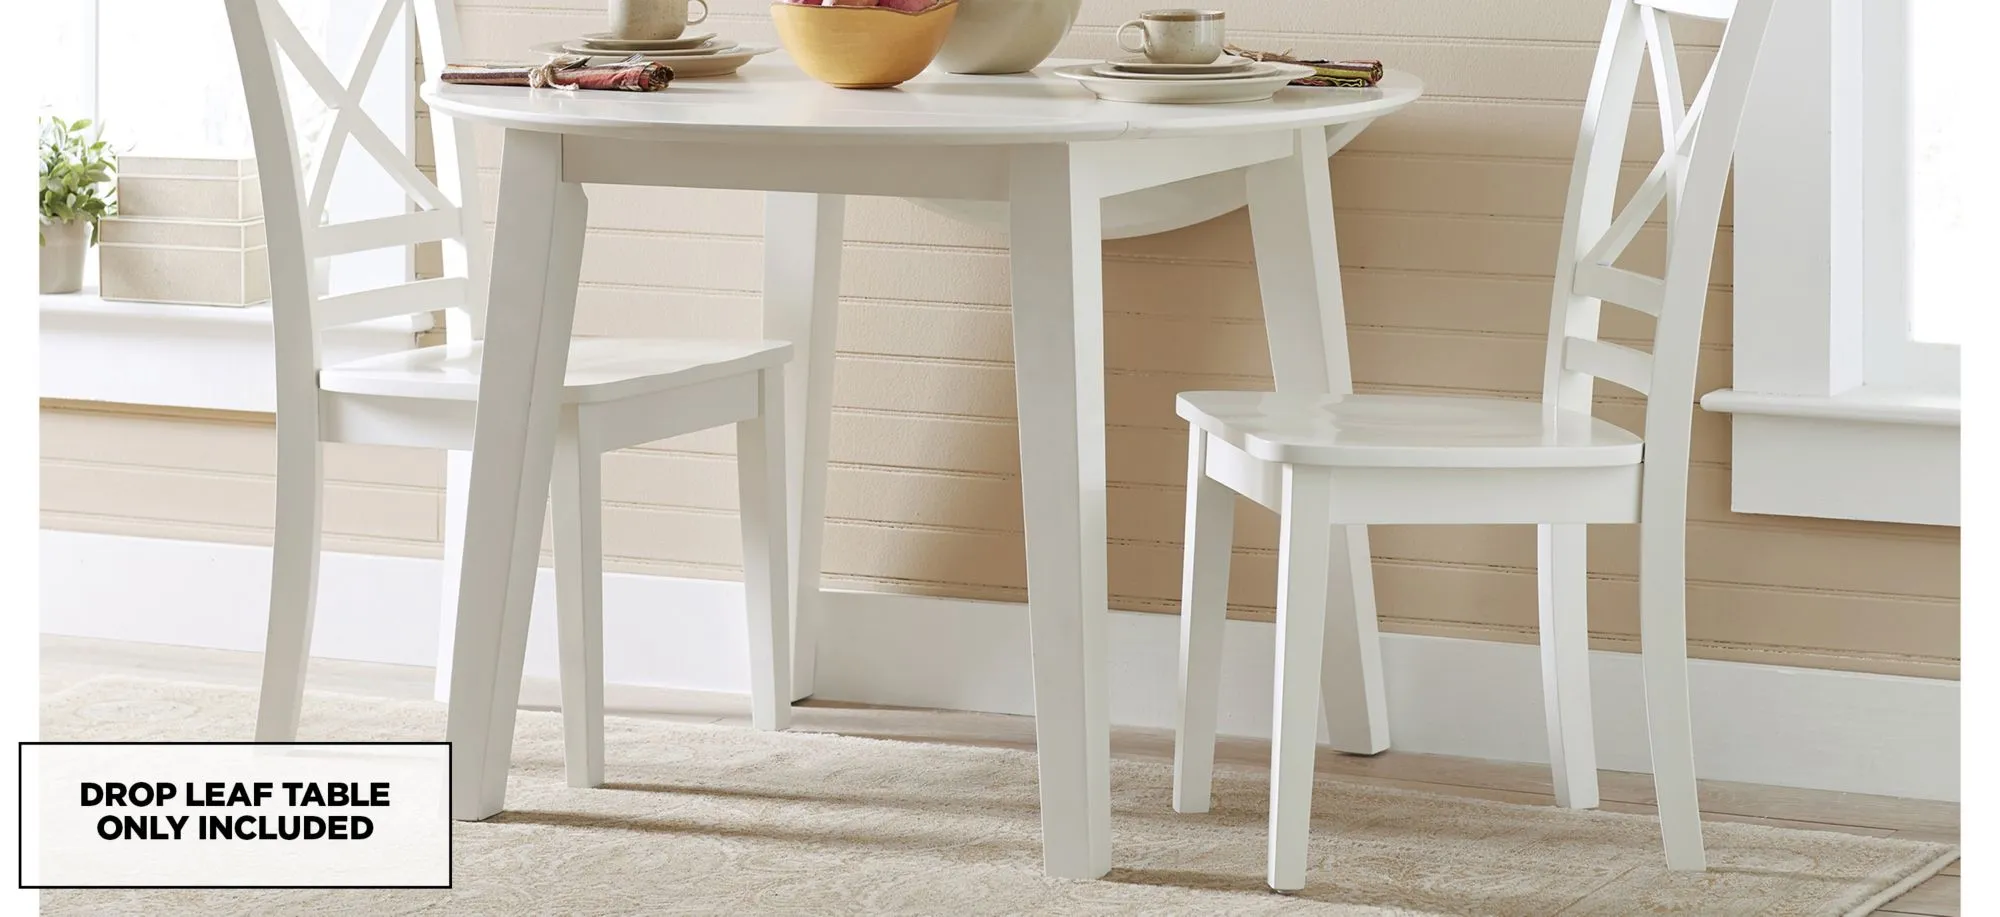 Simplicity Drop-Leaf Dining Table in Paperwhite by Jofran